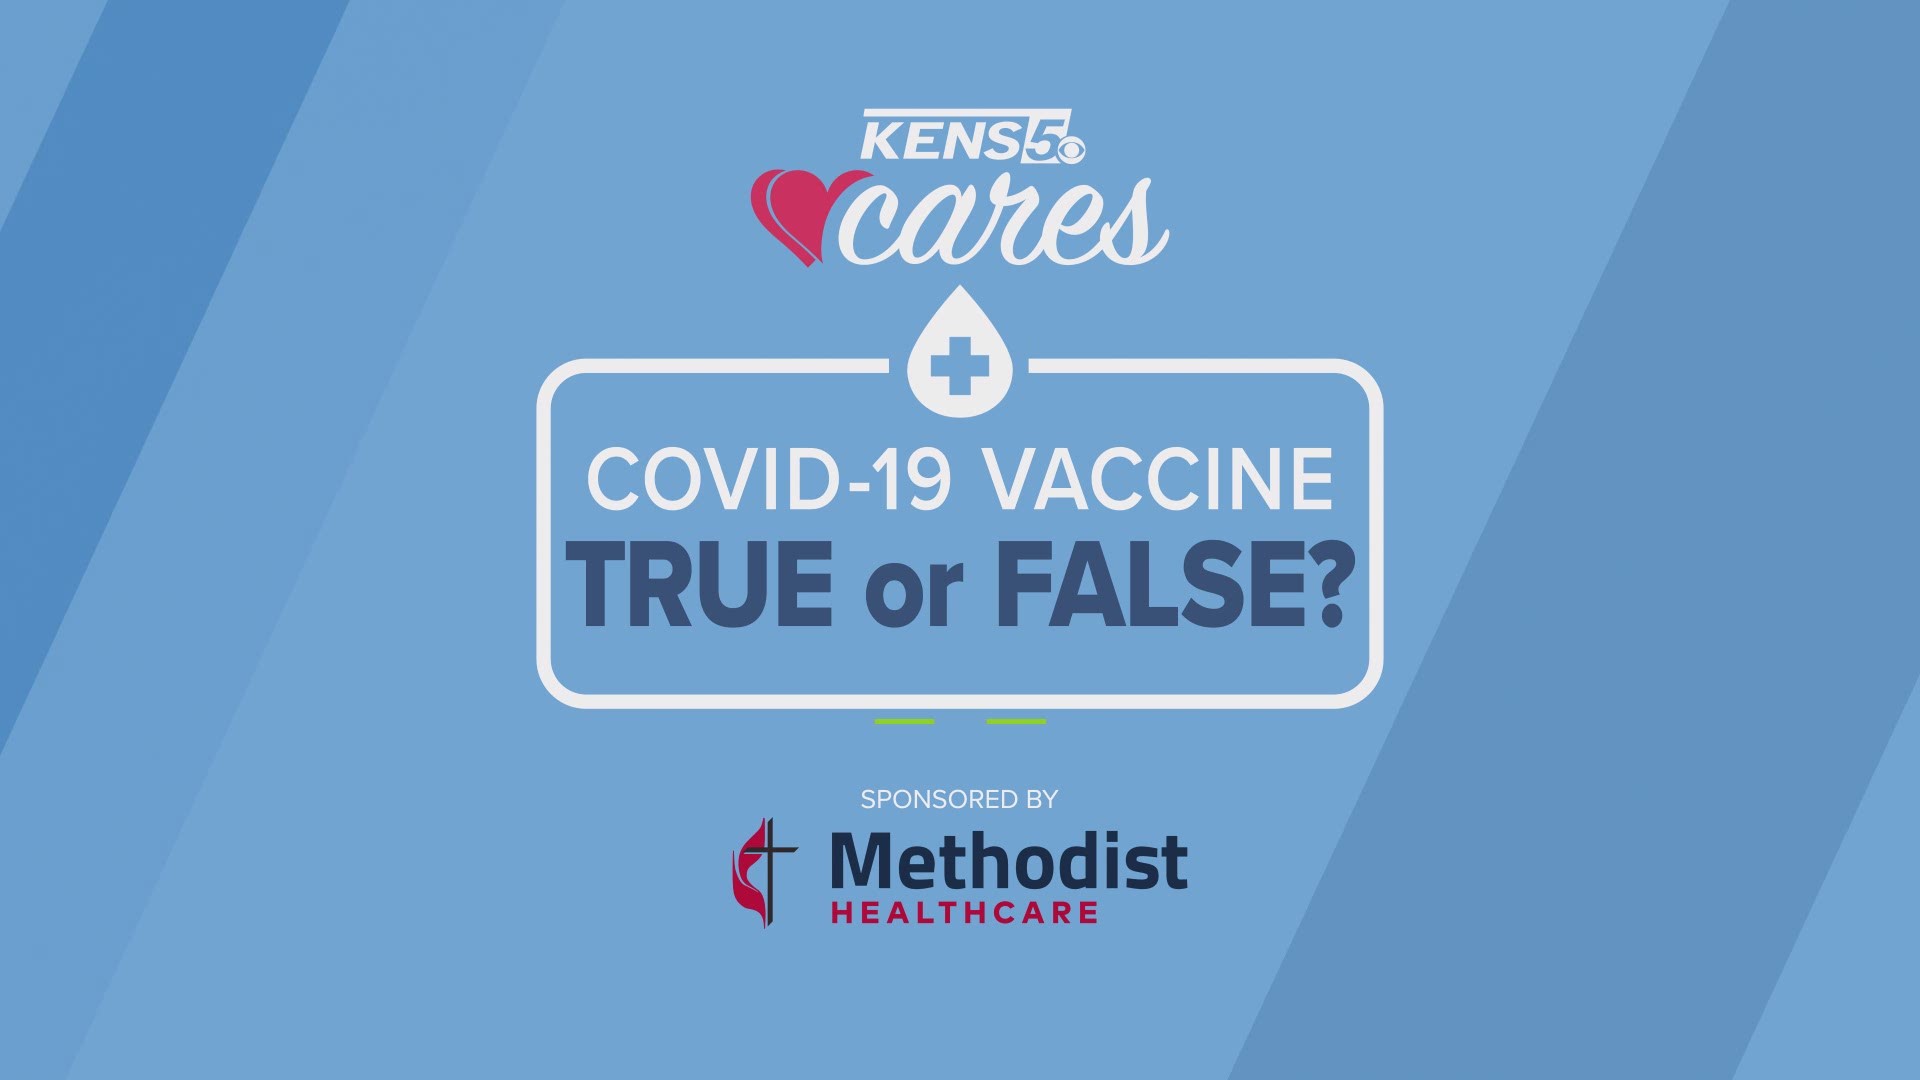 KENS 5 is debunking some of the common myths about COVID-19 vaccines so you’ll know the truth.